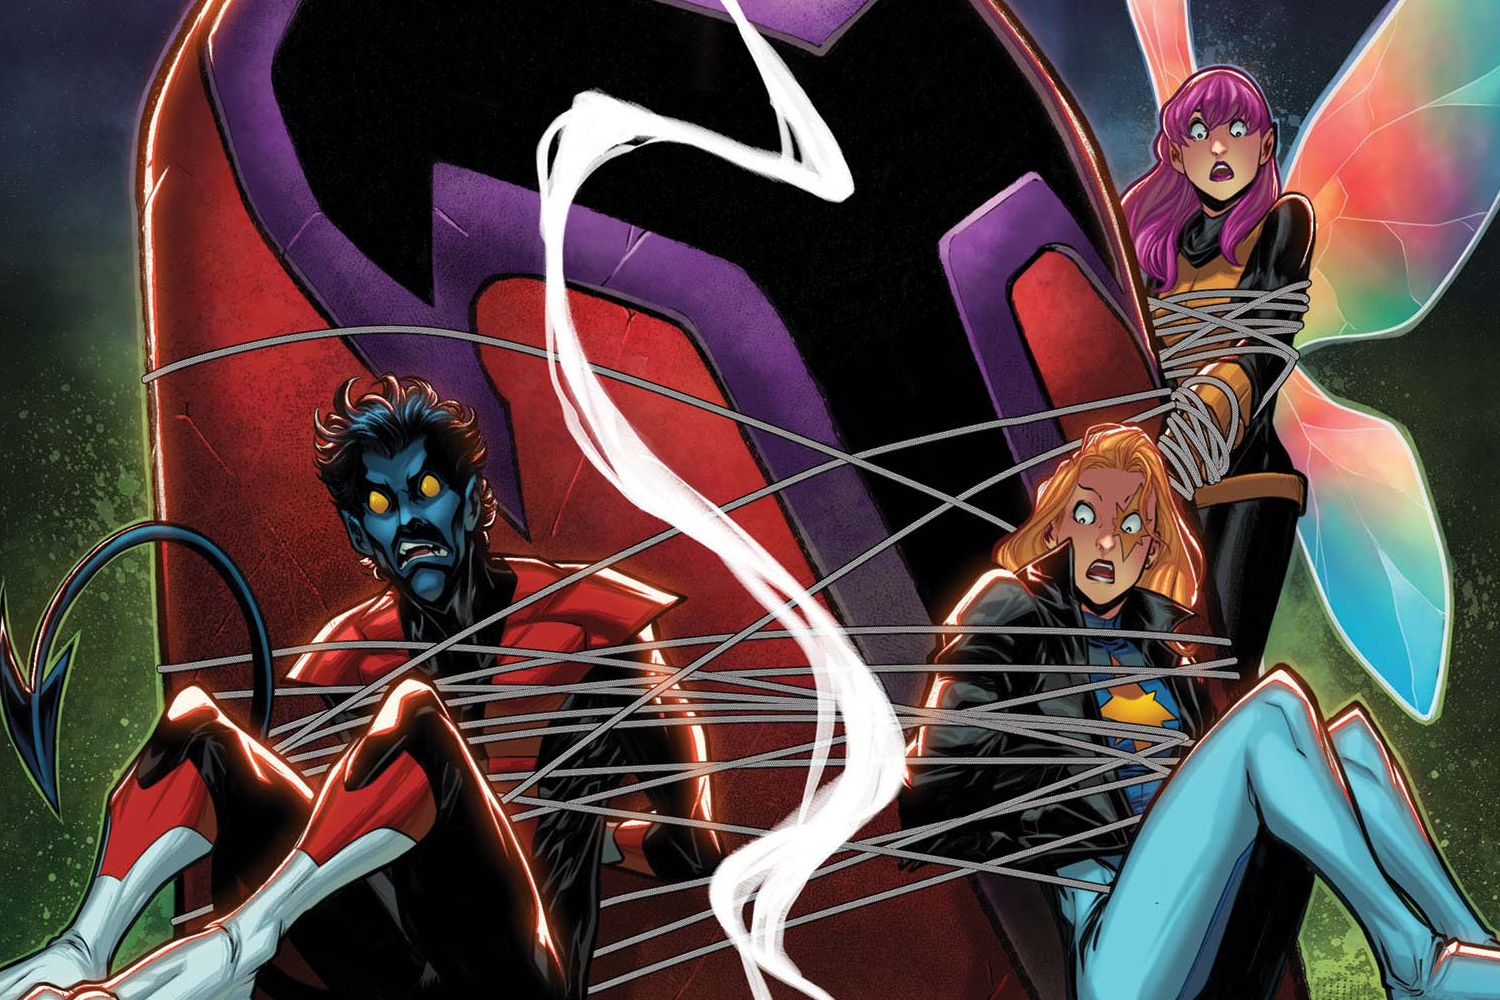 Nightcrawler rediscovers the sanctity of life in 'Way of X' #5